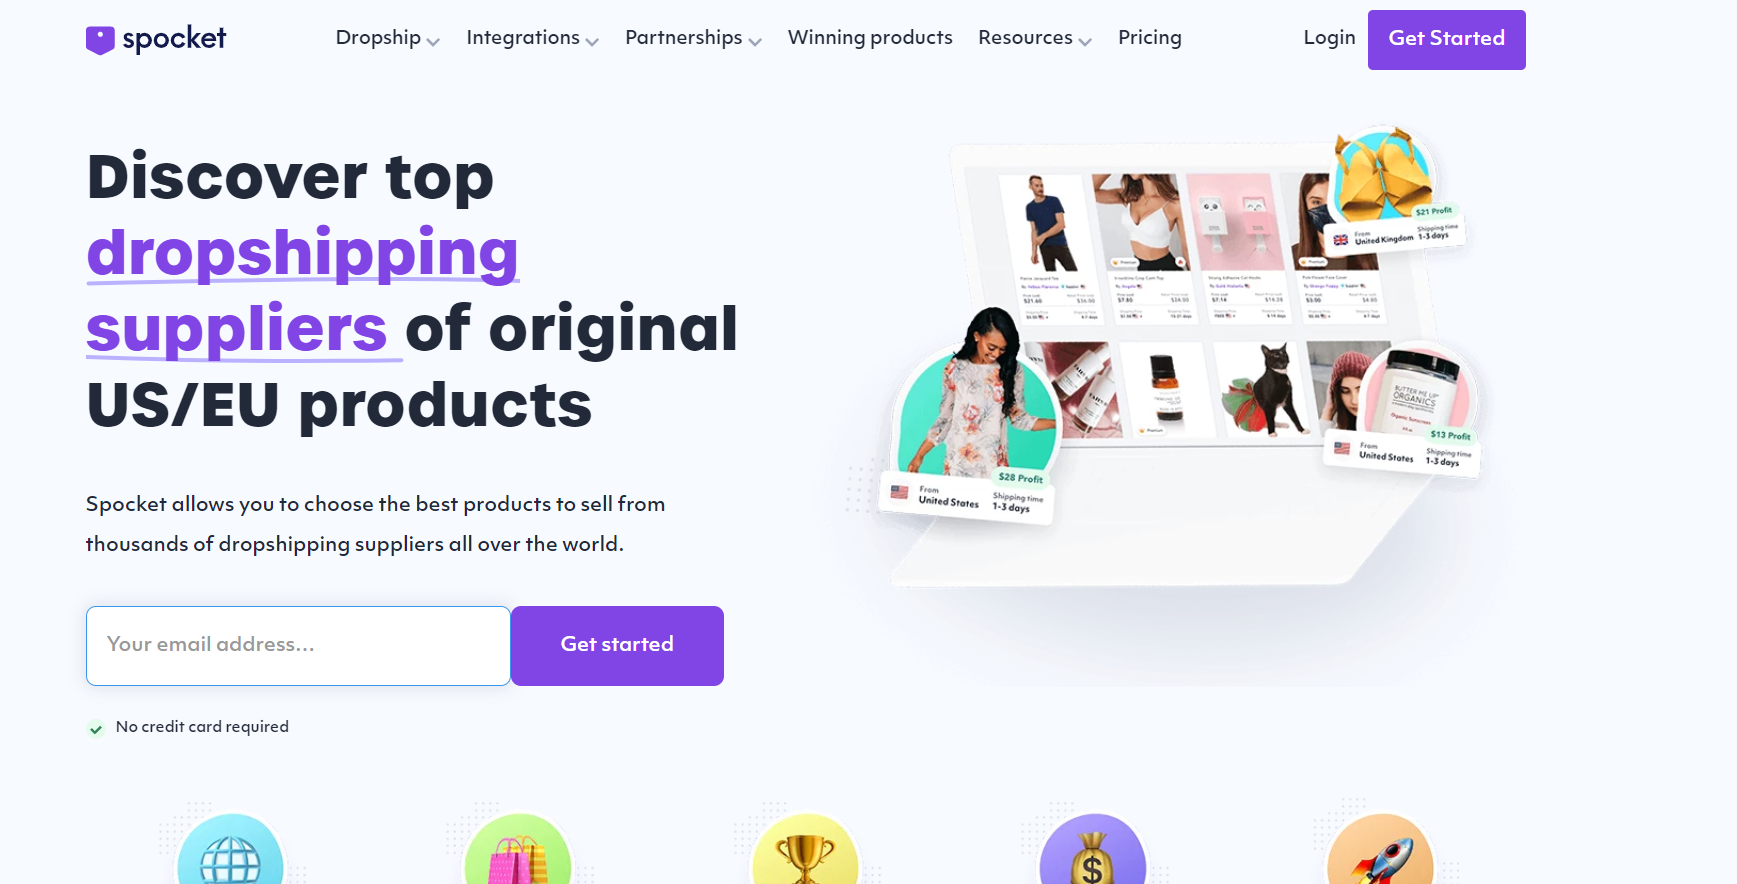 Spocket is an innovative dropshipping platform that connects dropshippers to certified electronics dropshipping suppliers primarily based in the US and Europe.